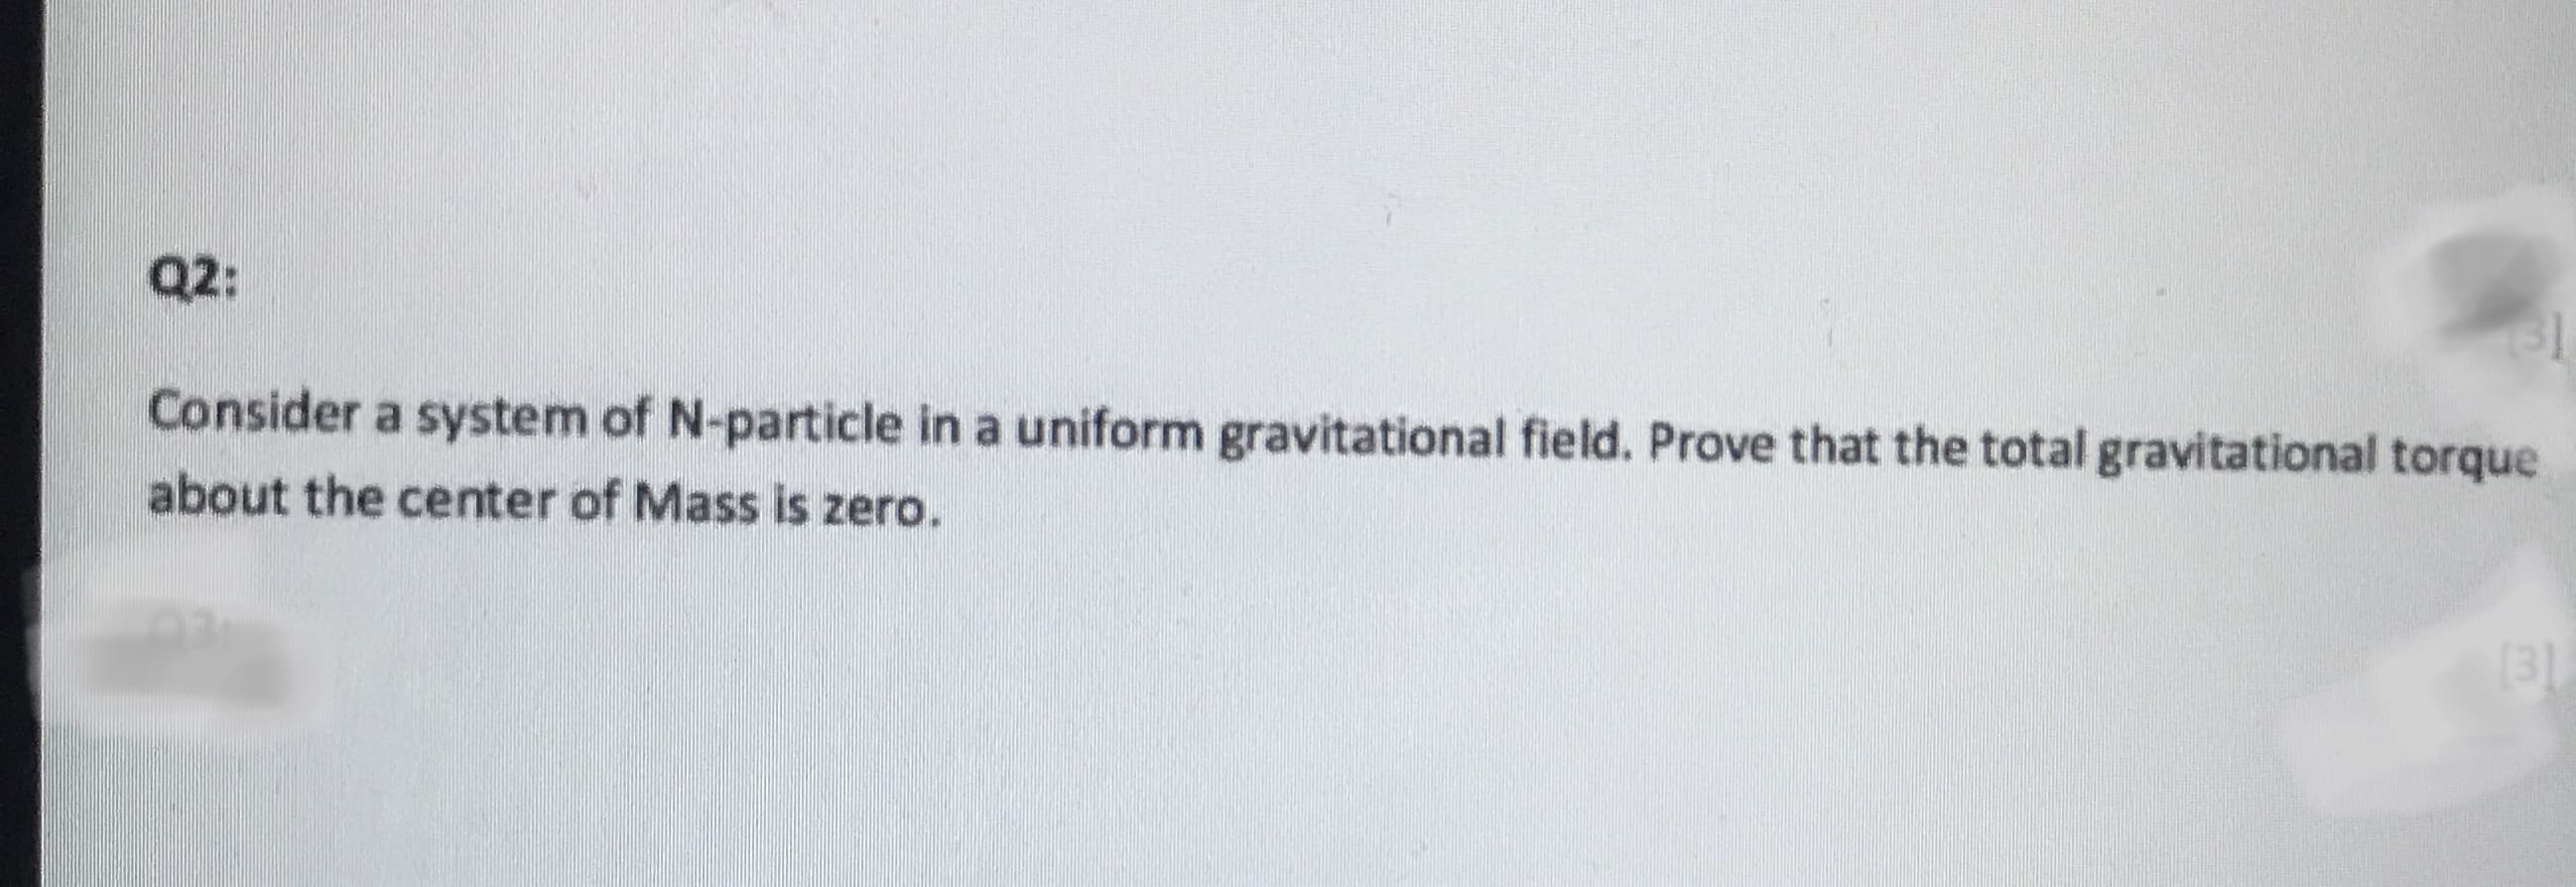 Consider a system of N-particle in a uniform gravitational field. Prove that the total gravitational torque
about the center of Mass is zero.
